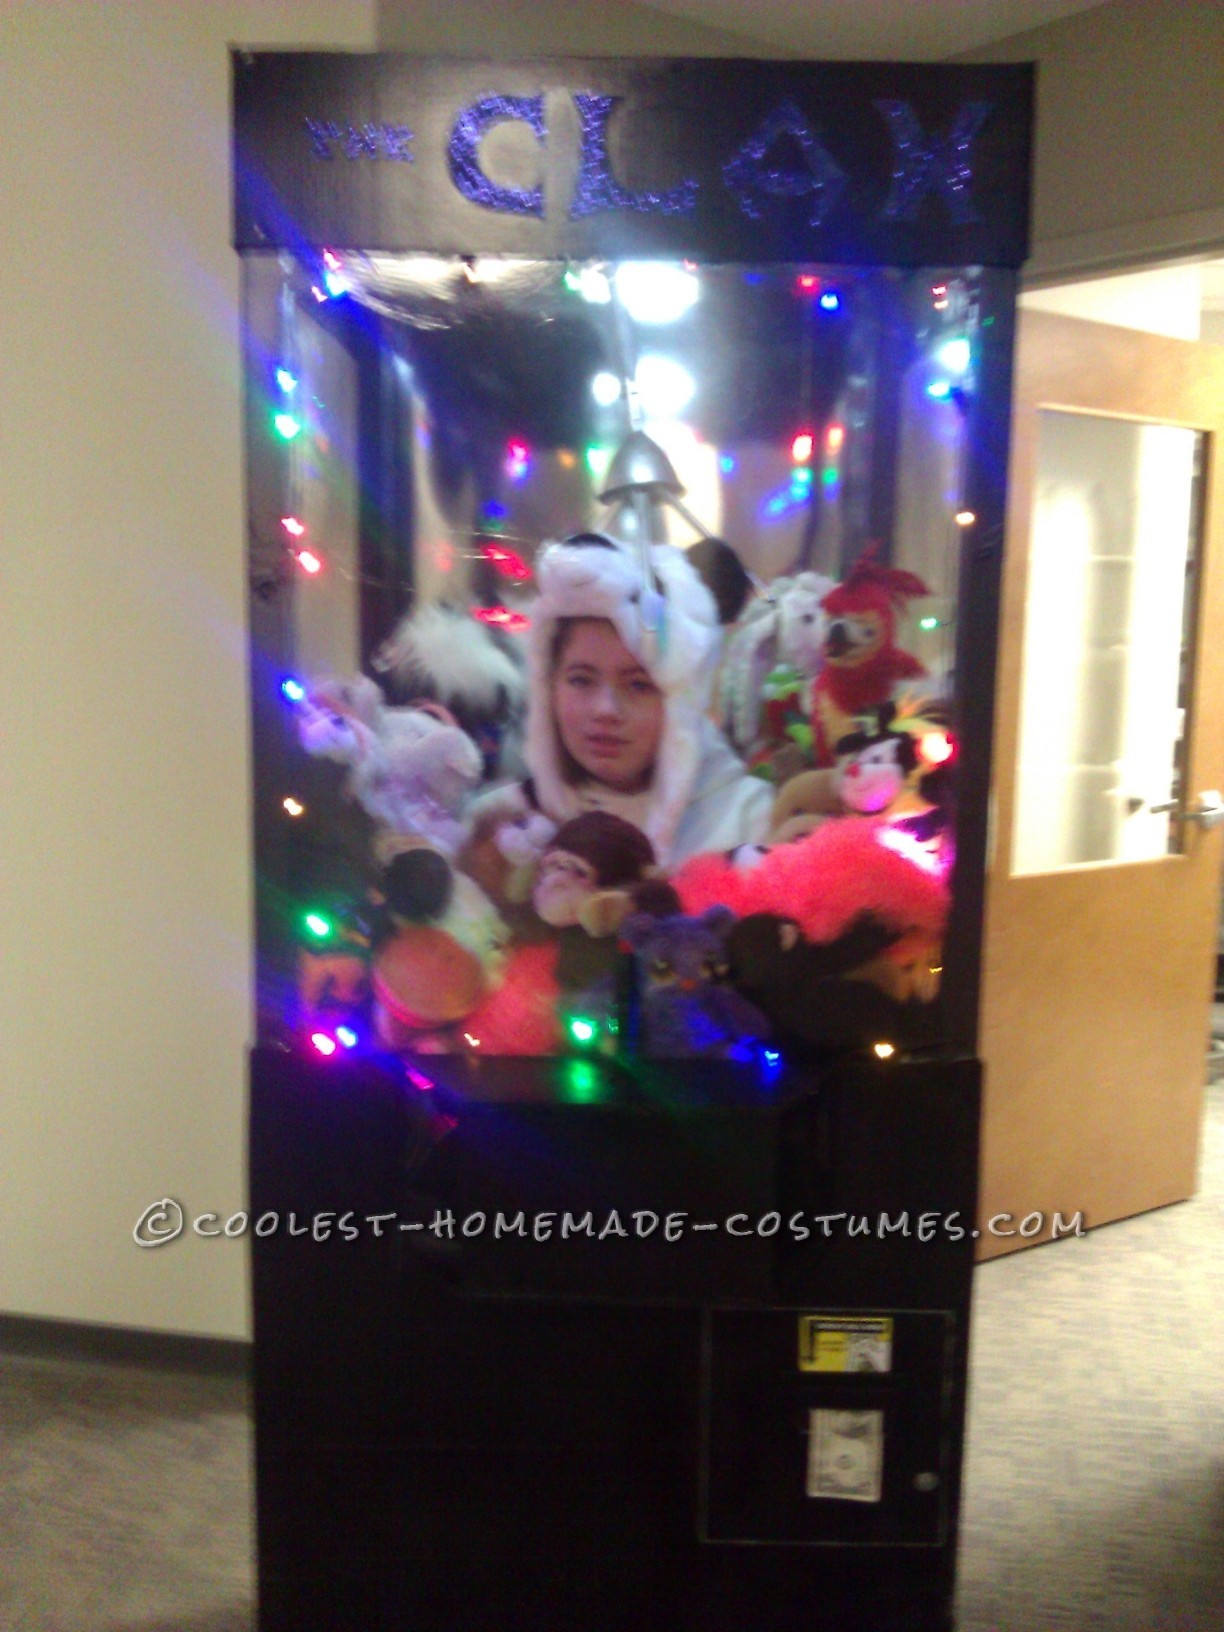 Awesome Homemade Costume Idea: The Claw Machine